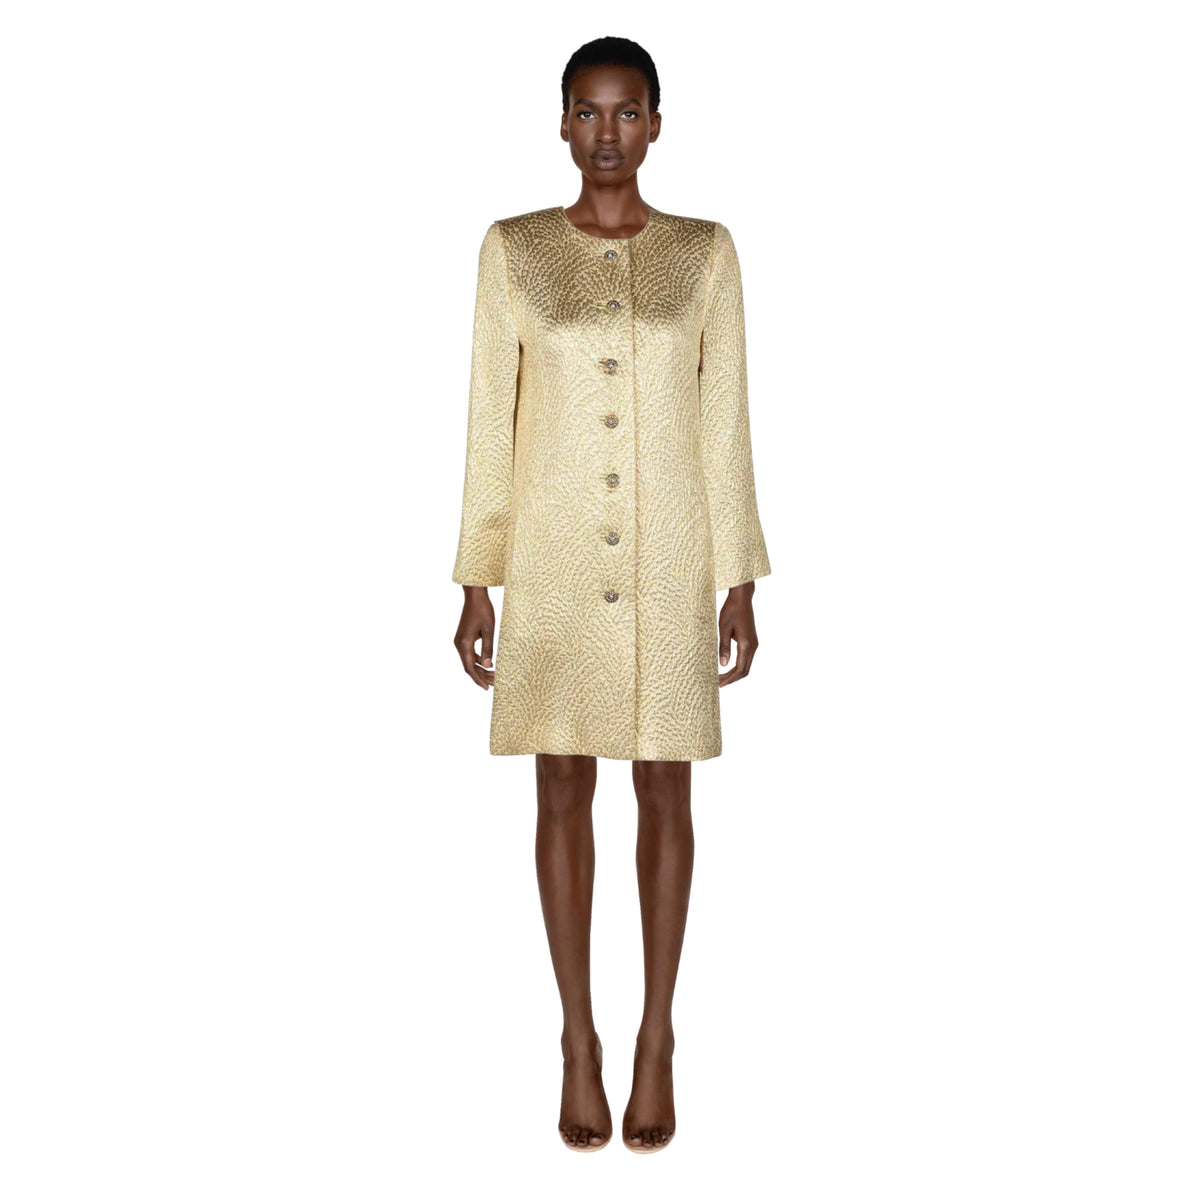 YVES SAINT LAURENT Gold Evening Coat with Jeweled Buttons 1990s | Size 38 FR